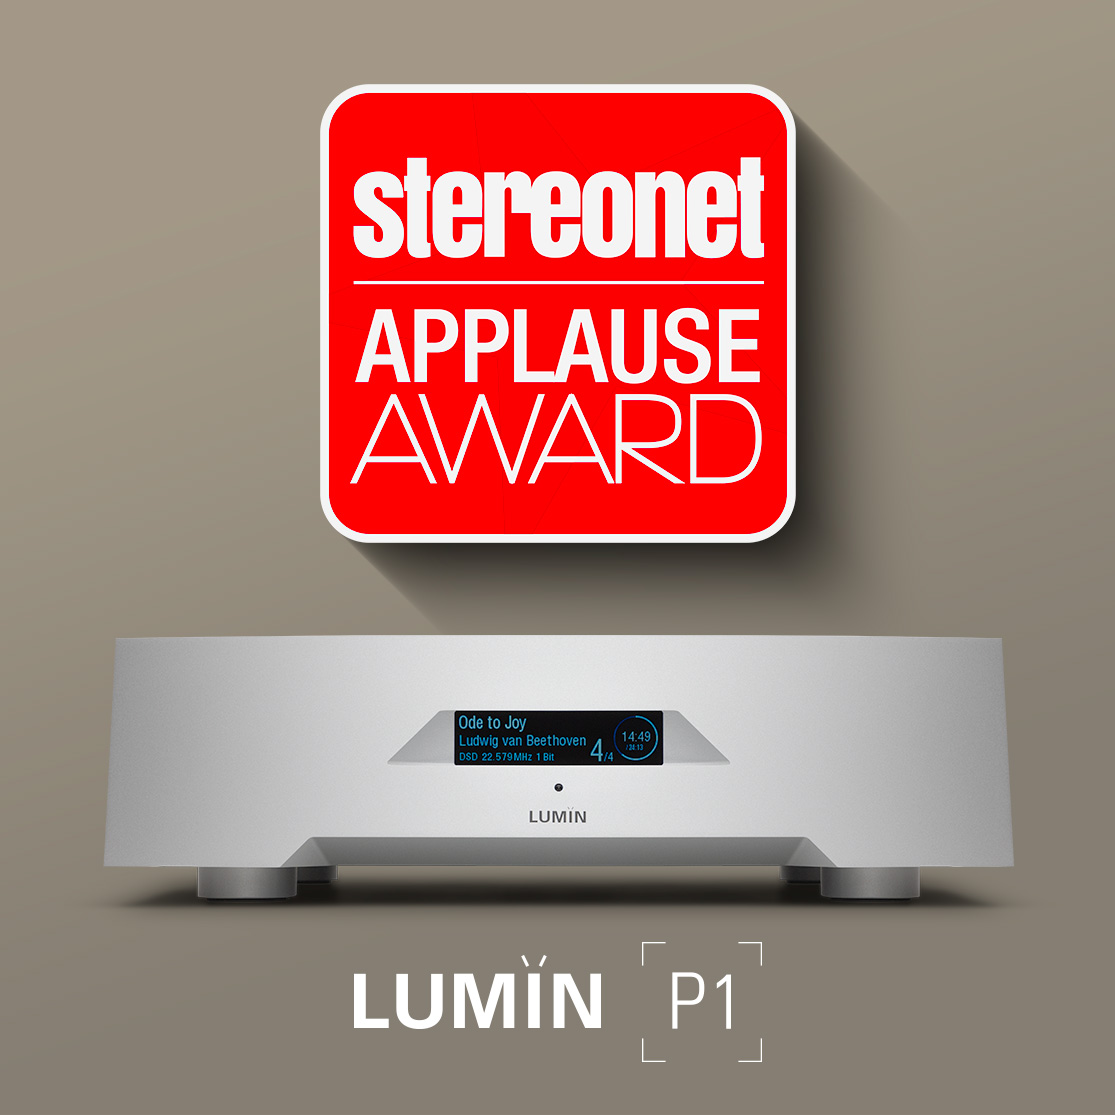 Stereonet Applause award